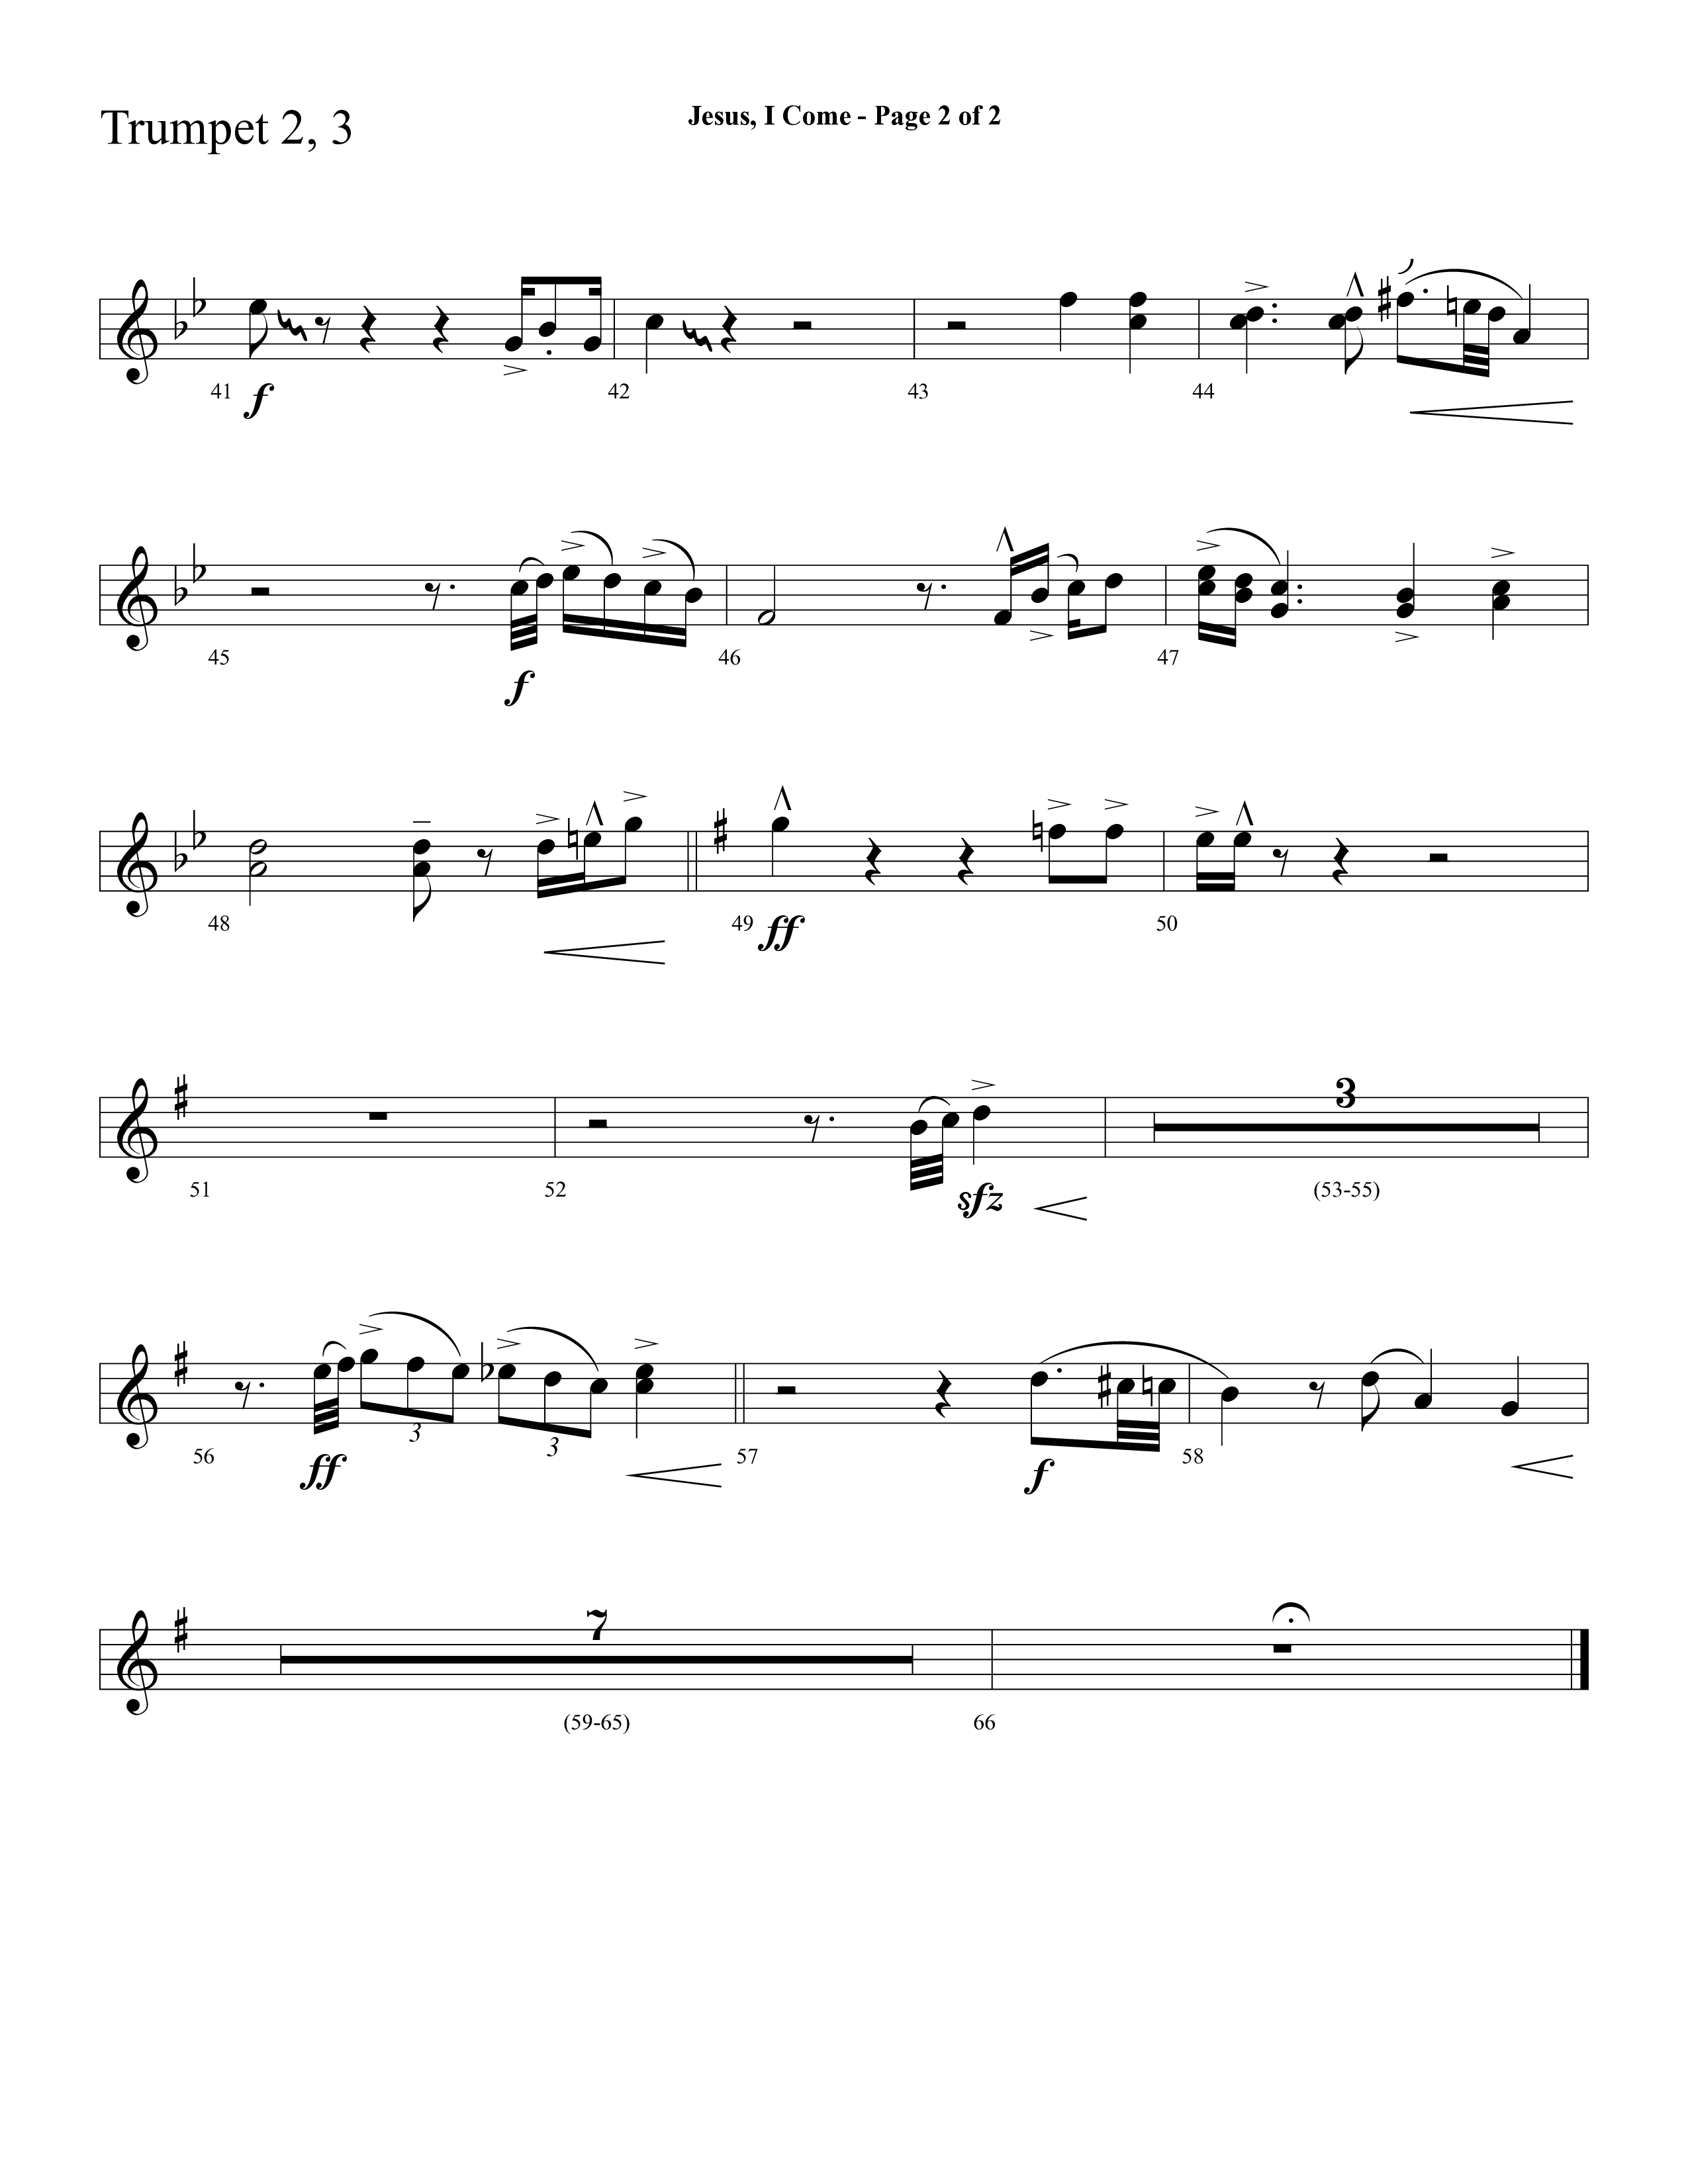 Jesus I Come (with Pass Me Not) (Choral Anthem SATB) Trumpet 2/3 (Lifeway Choral / Arr. Cliff Duren)